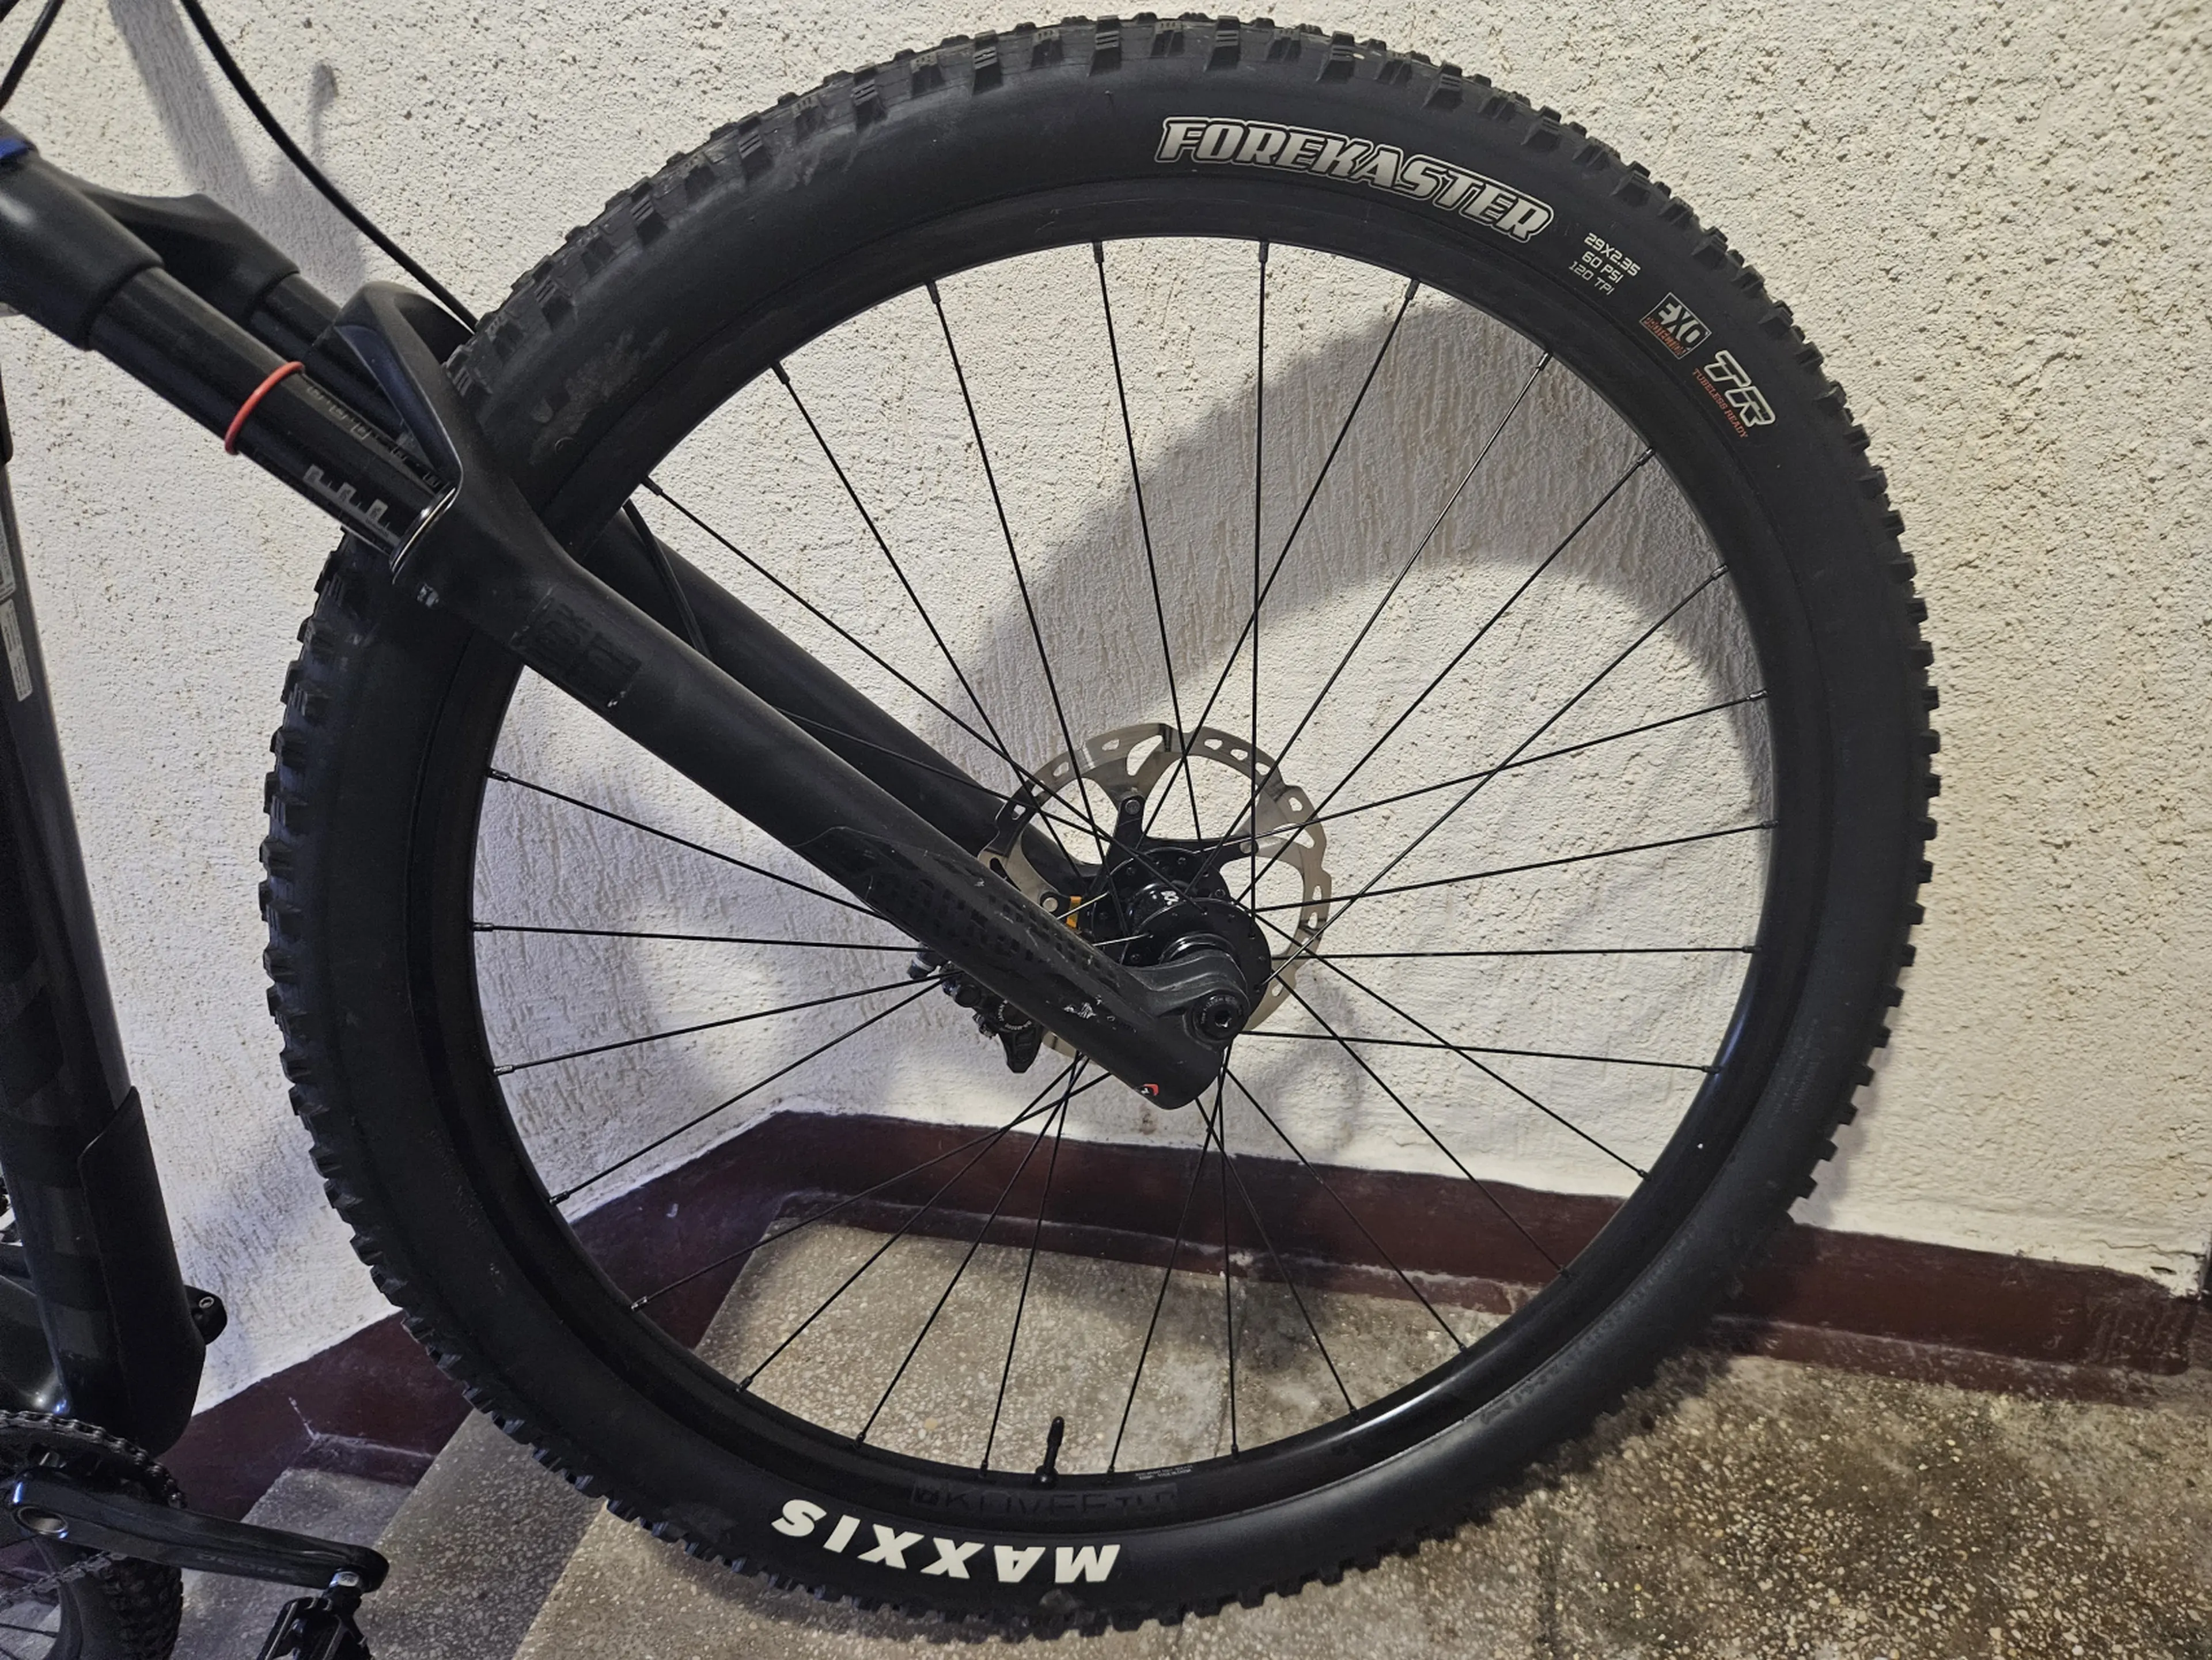 2. Maxxis Forekaster TR EXO Dual 120 | 29 x 2.35 inch